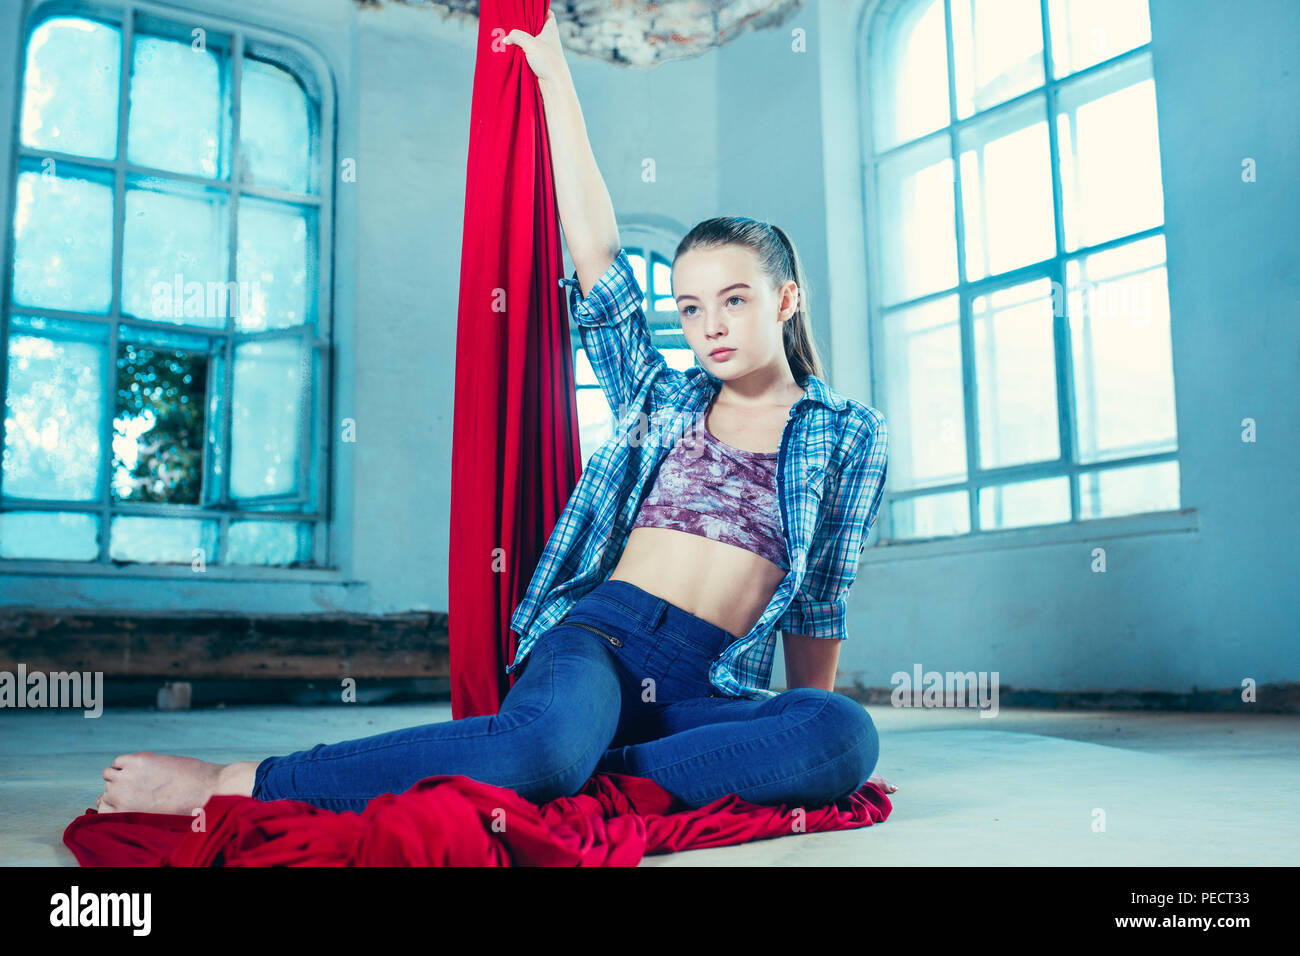 Graceful gymnast resting after performing aerial exercise with red fabrics on blue old loft background. Young teen caucasian fit girl. The circus, acrobatic, acrobat, performer, sport, fitness, gymnastic concept Stock Photo